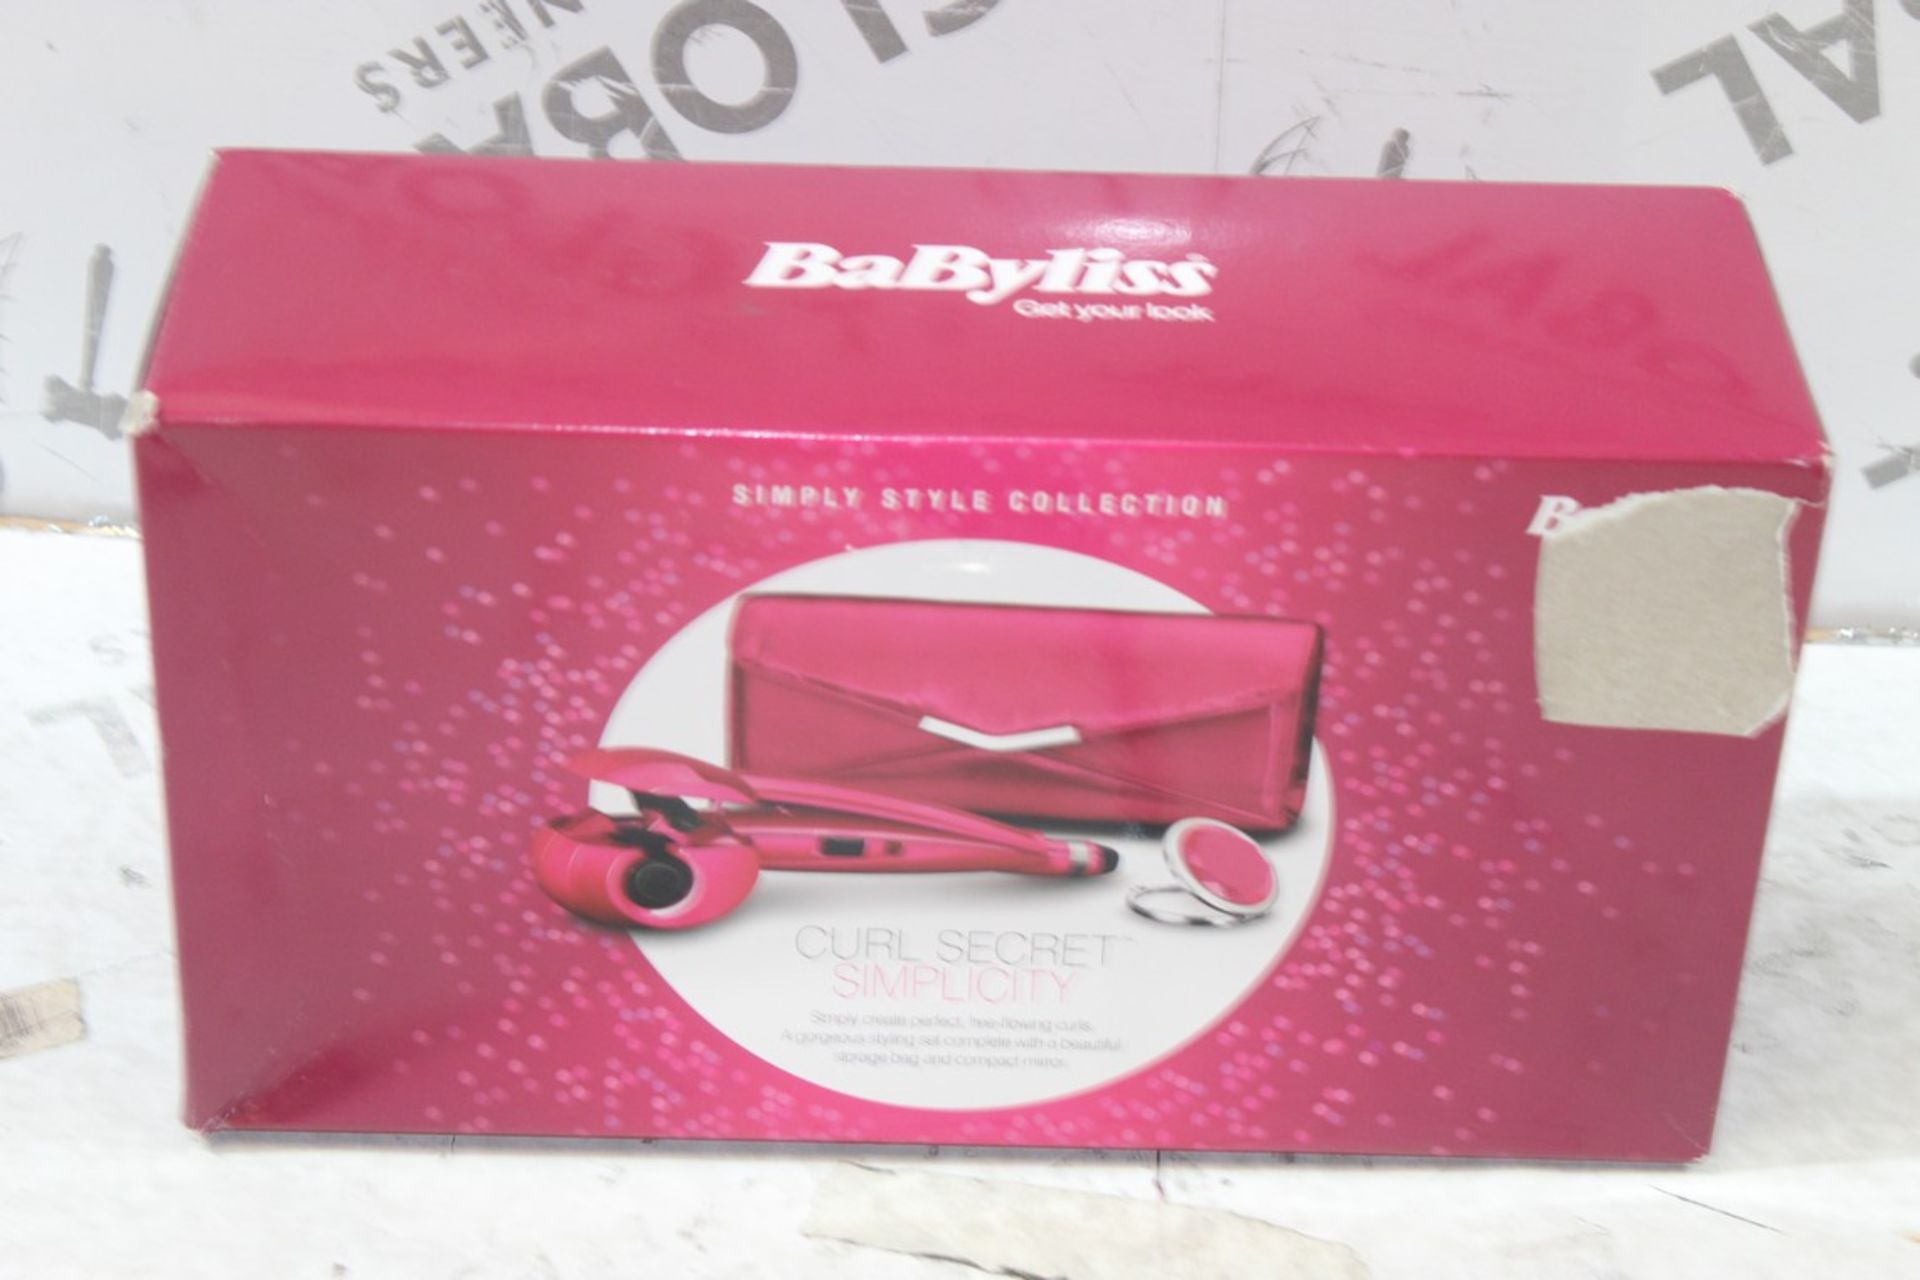 Boxed Babyliss Curl Secrets Hair Curlers RRP £120 (Appraisals Available Upon Request) (Untested